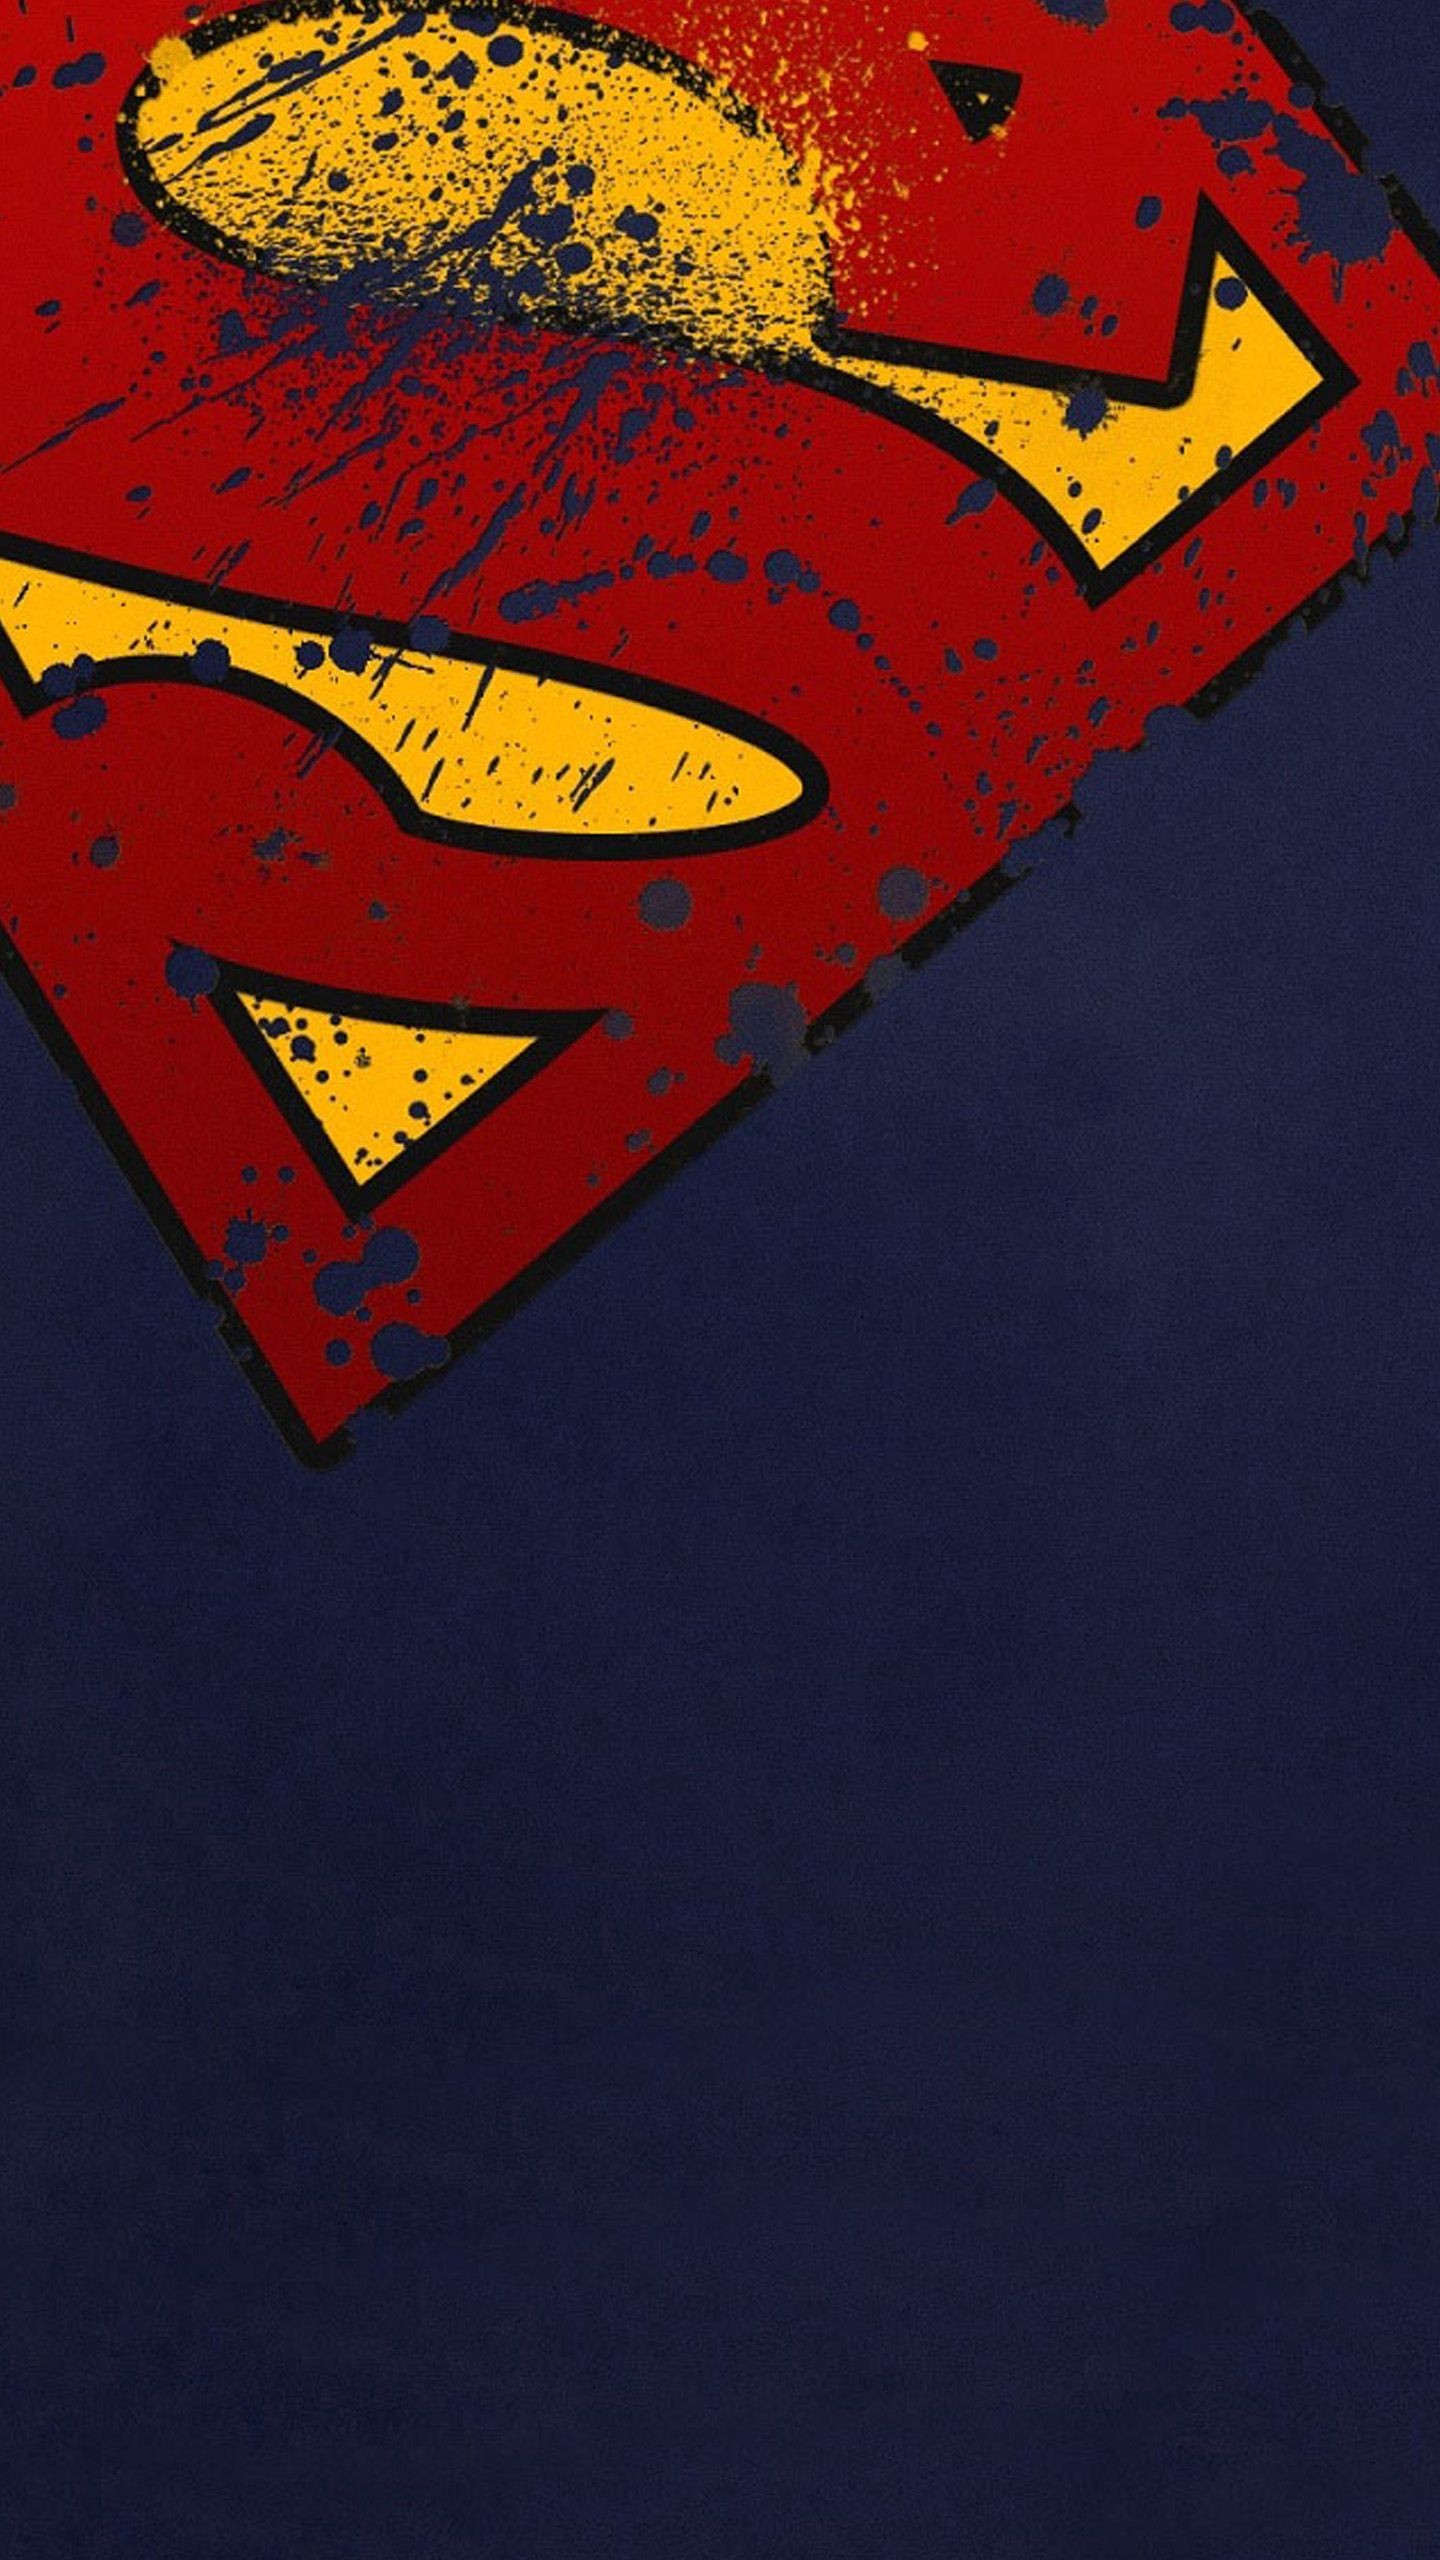 Superman Phone Wallpaper (77+ pictures)